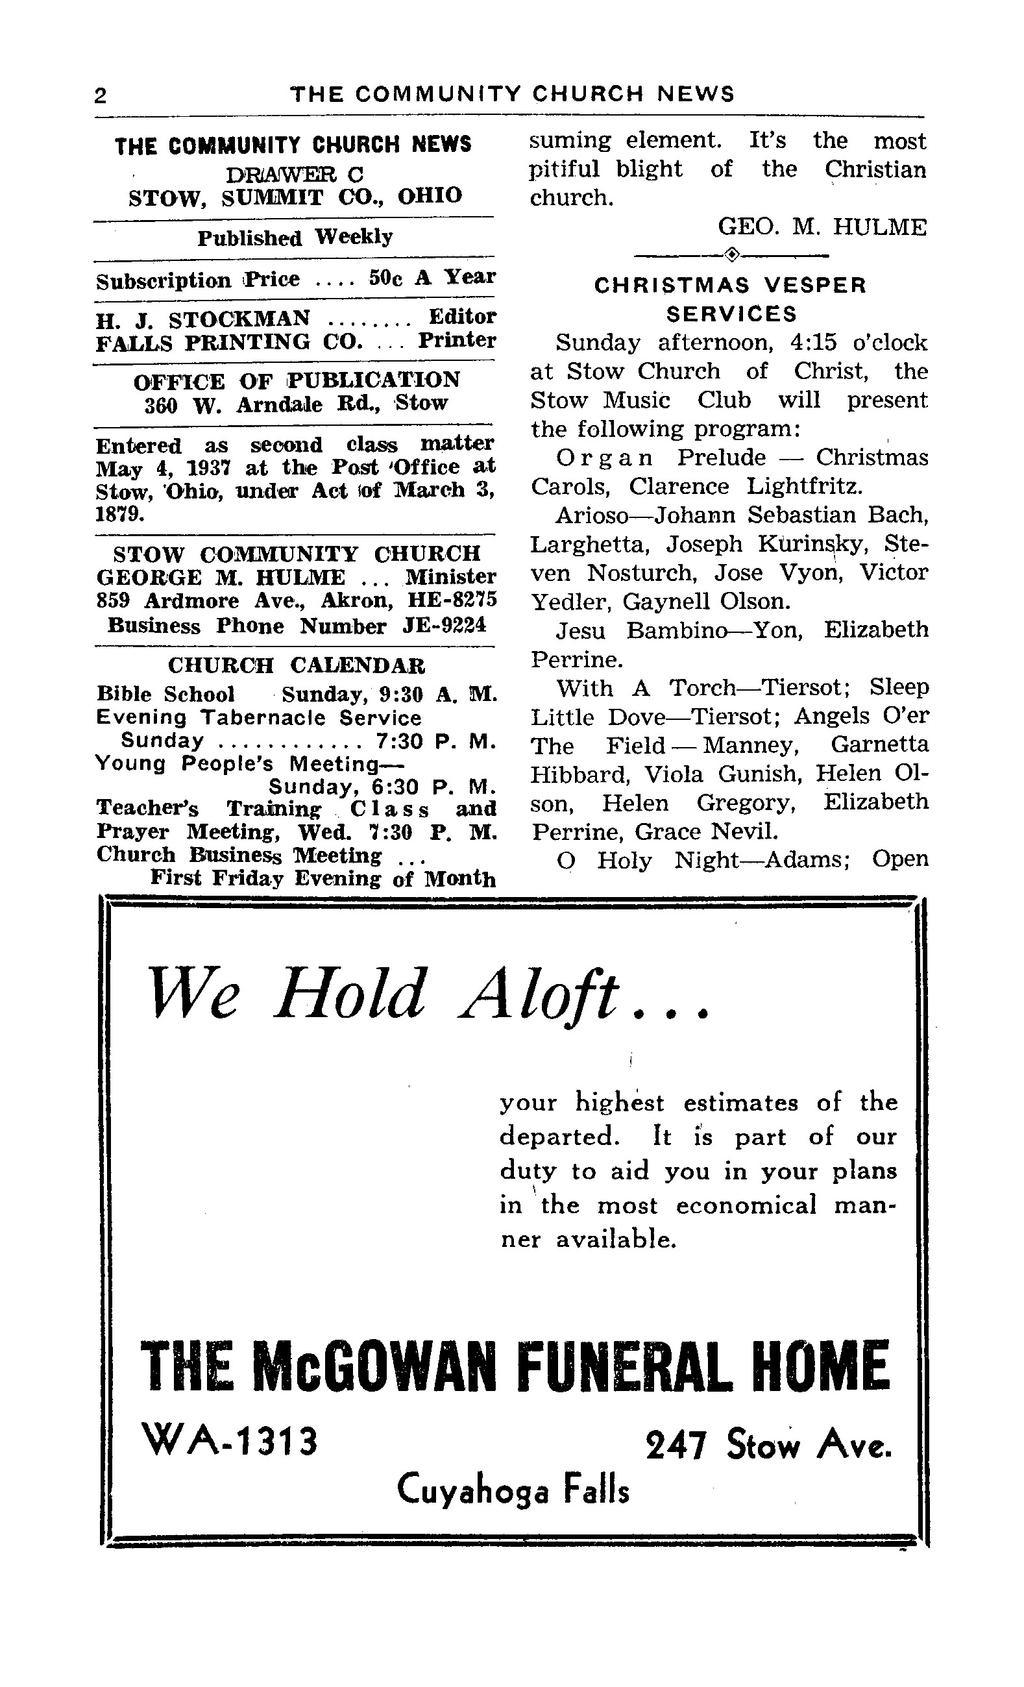 2 THE COMMUNITY CHURCH NEJWIS 2 THE COMMUNITY CHURCH NEWS DRAWER C STOW, SUMMIT CO., OHIO Published Weekly Subscription Price 50c A Year H. J. STOCKMAN Editor FALLS PRINTING CO.